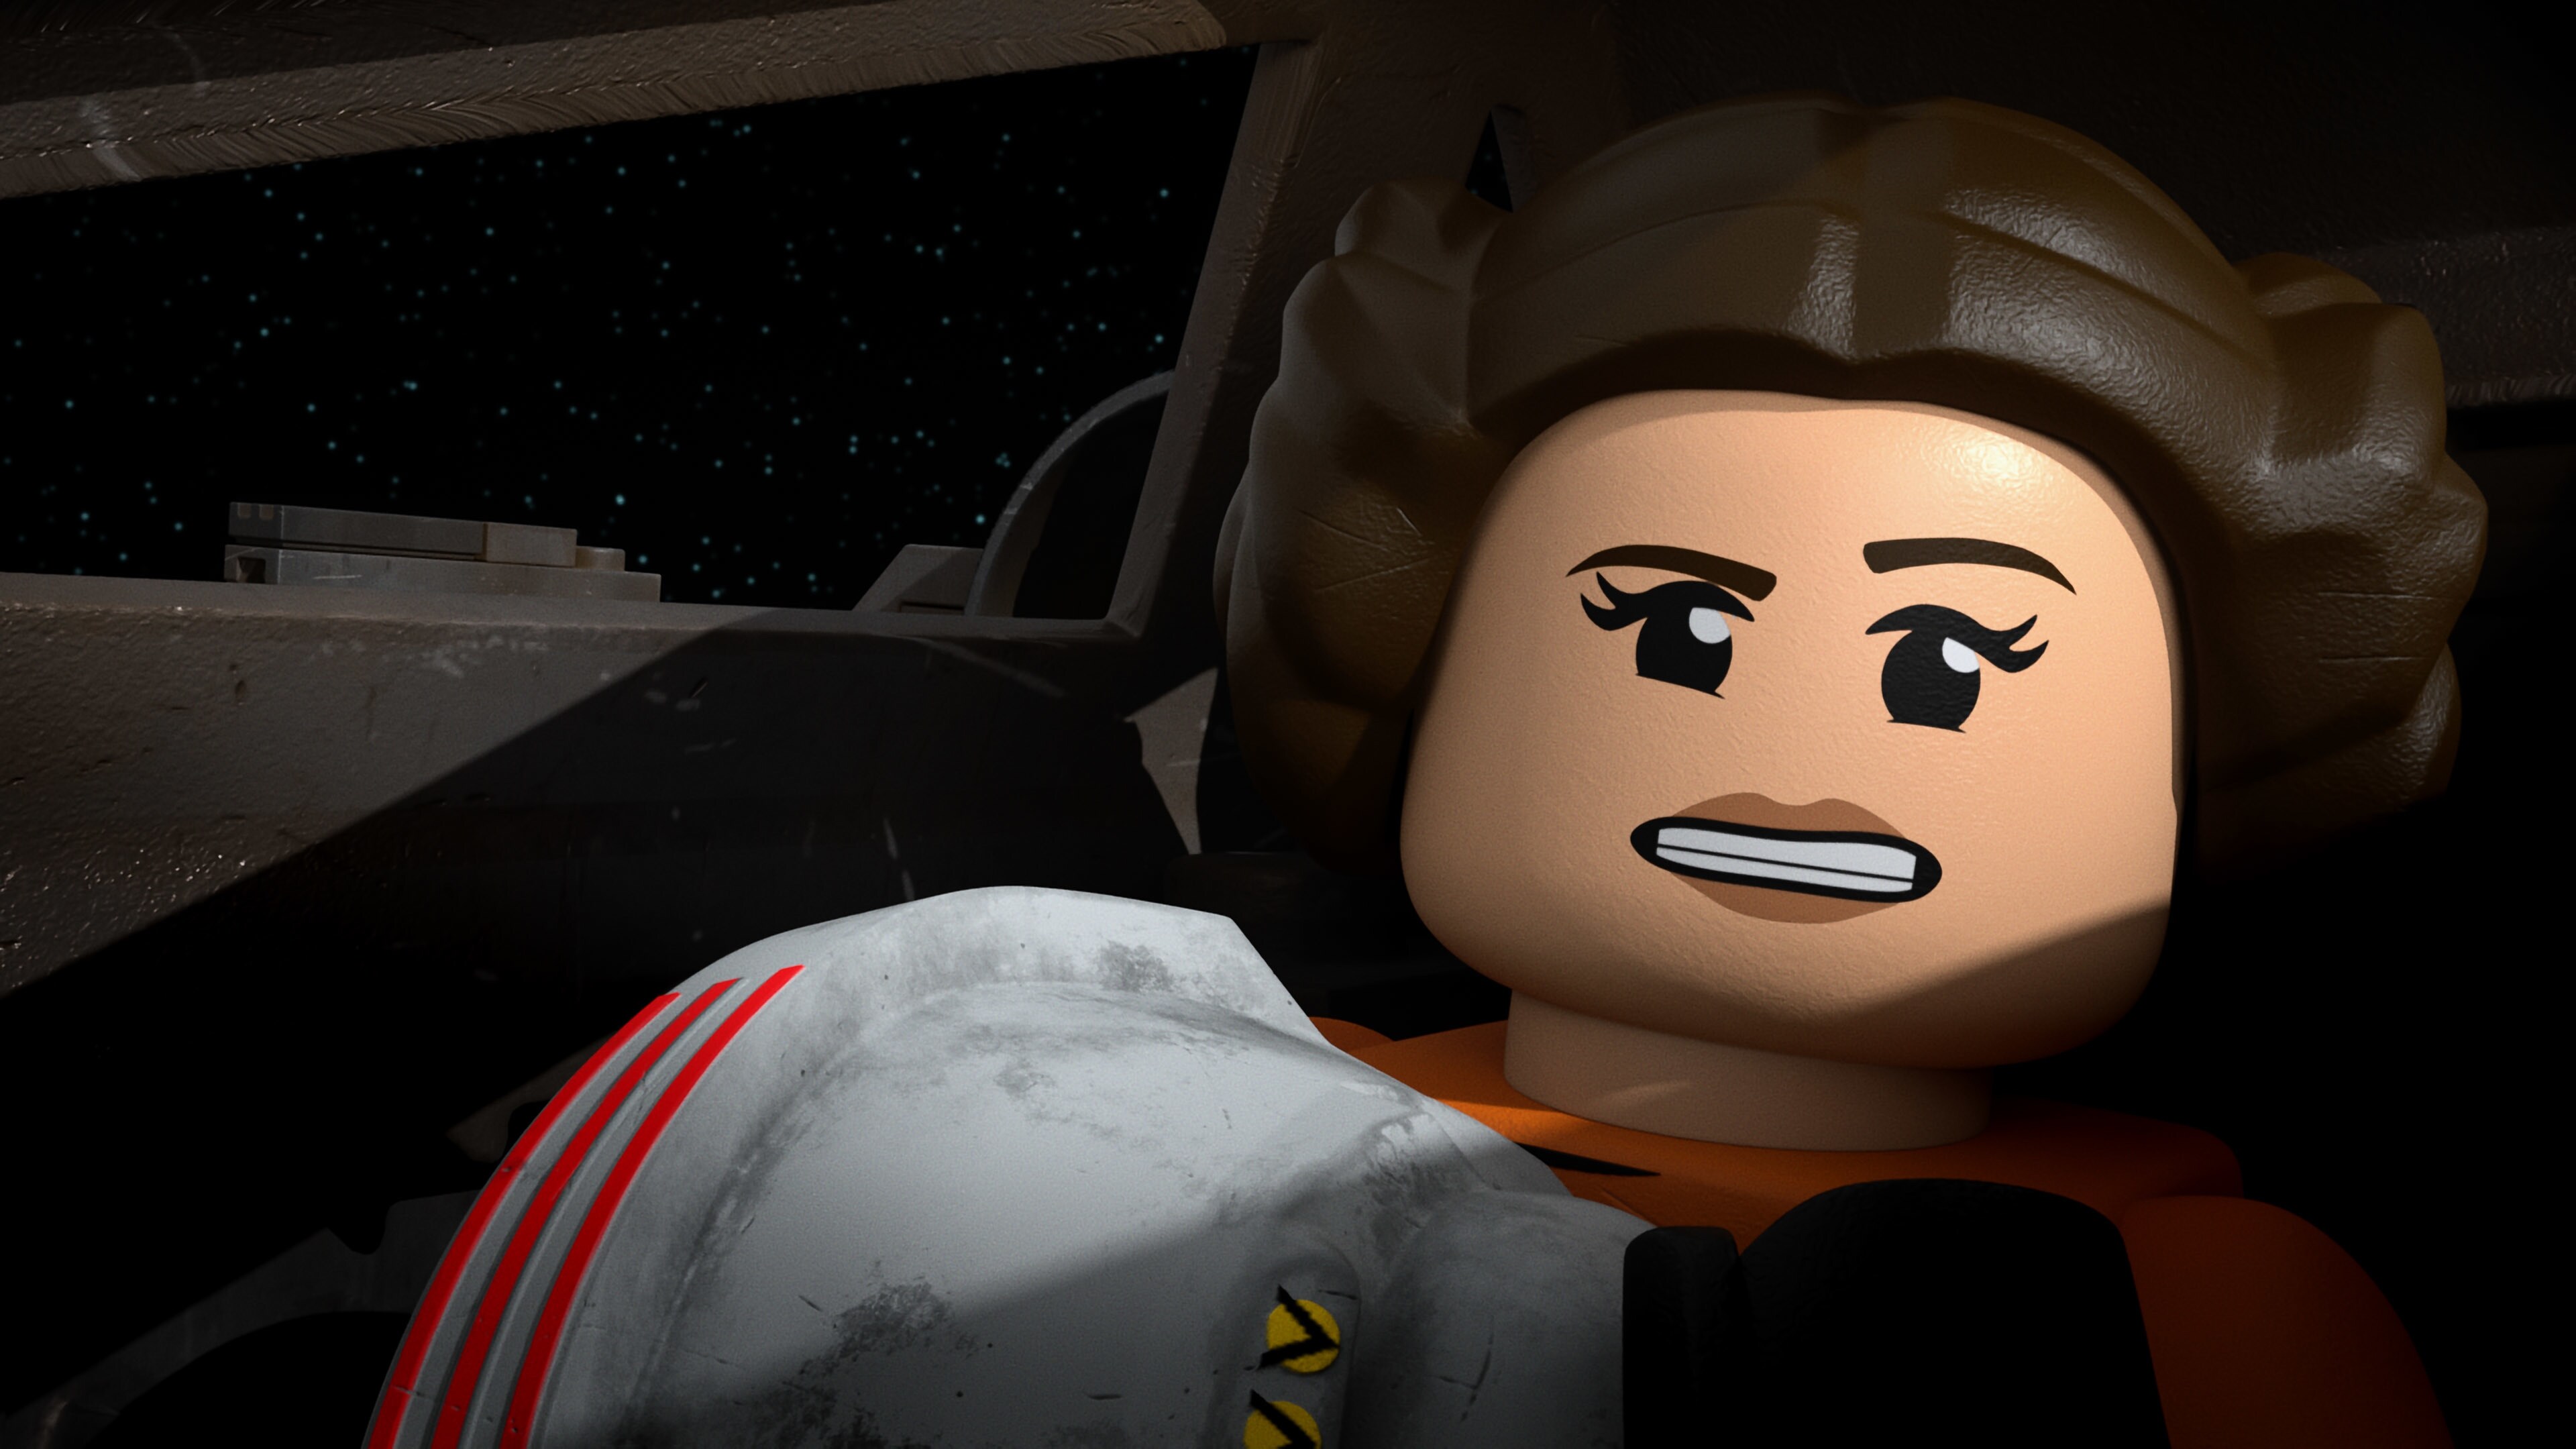 Princess Leia dons a flight suit and takes charge in an important battle in the tale of "The Wookiee's Paw" in LEGO STAR WARS TERRIFYING TALES exclusively on Disney+. ©2021 Lucasfilm Ltd. & TM. All Rights Reserved.